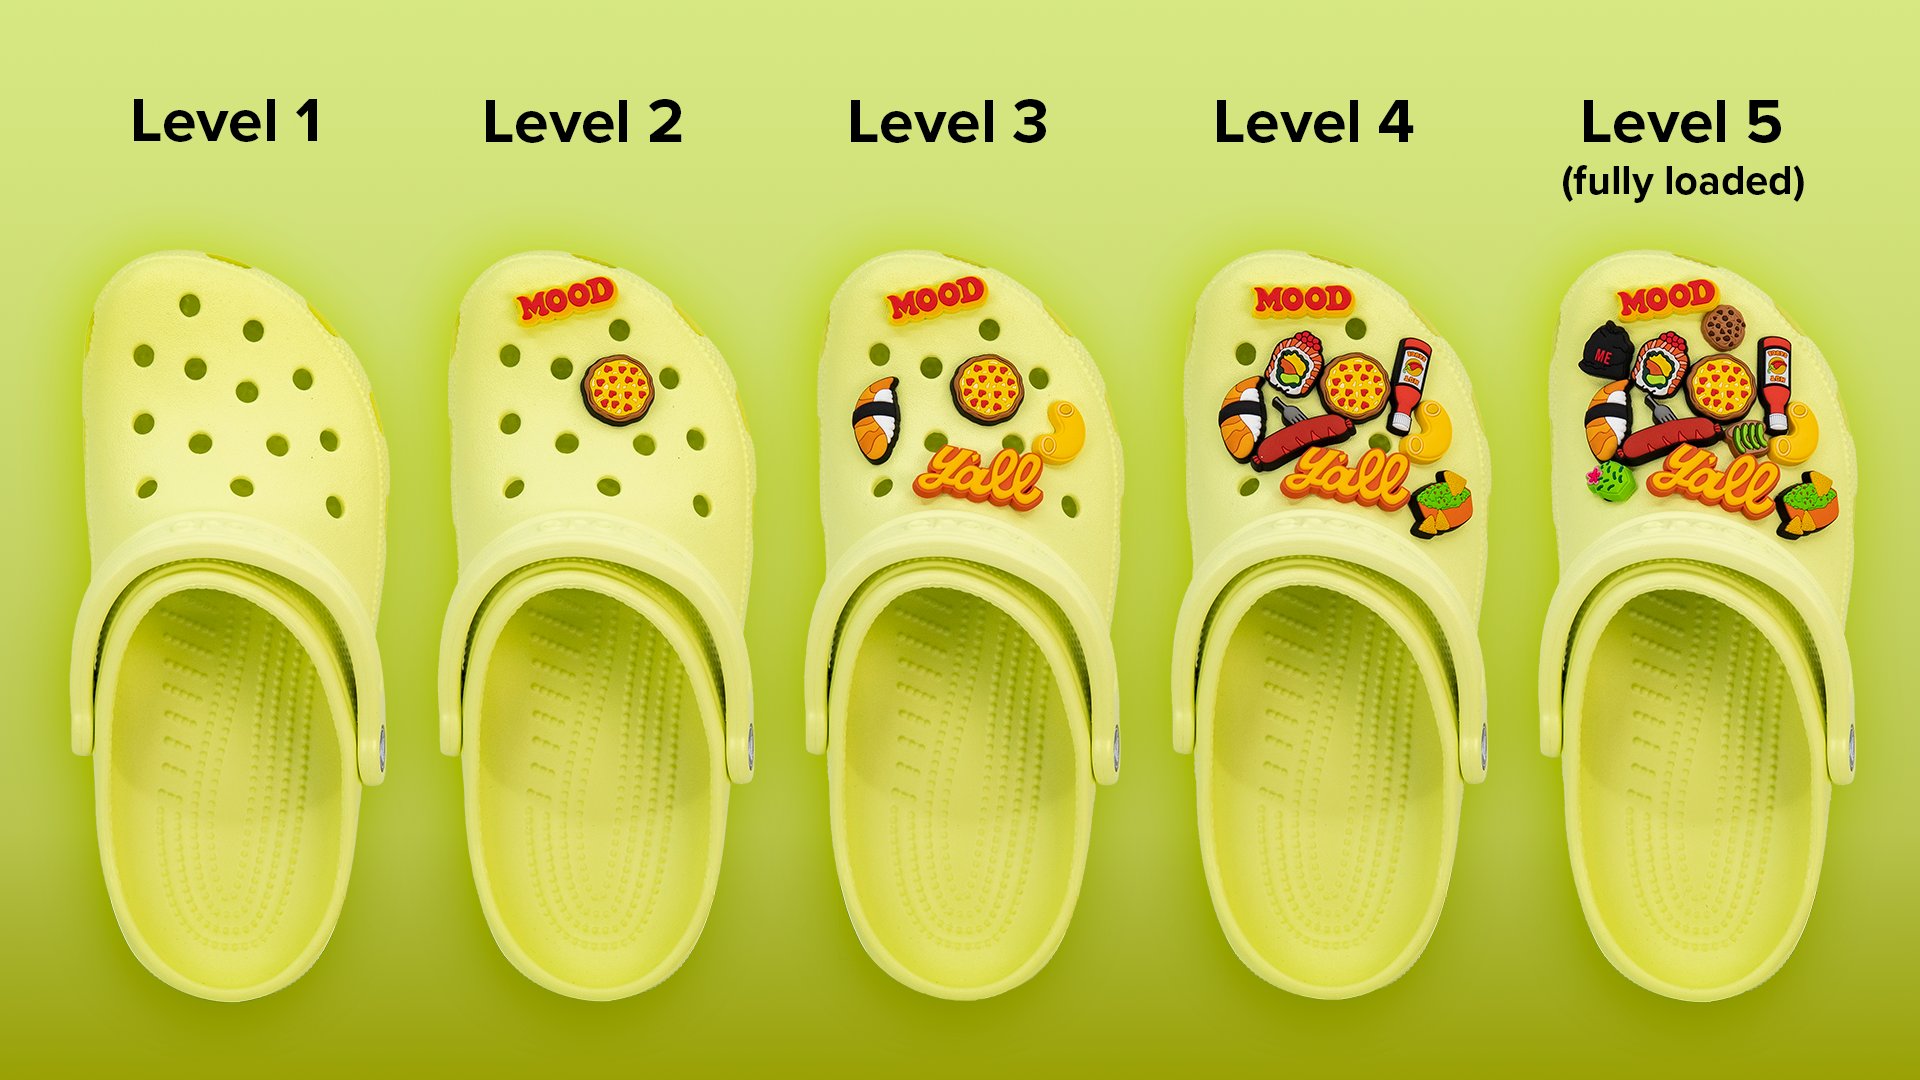 Crocs on X: Okay let's do this again! What's your Jibbitz charms level?   / X